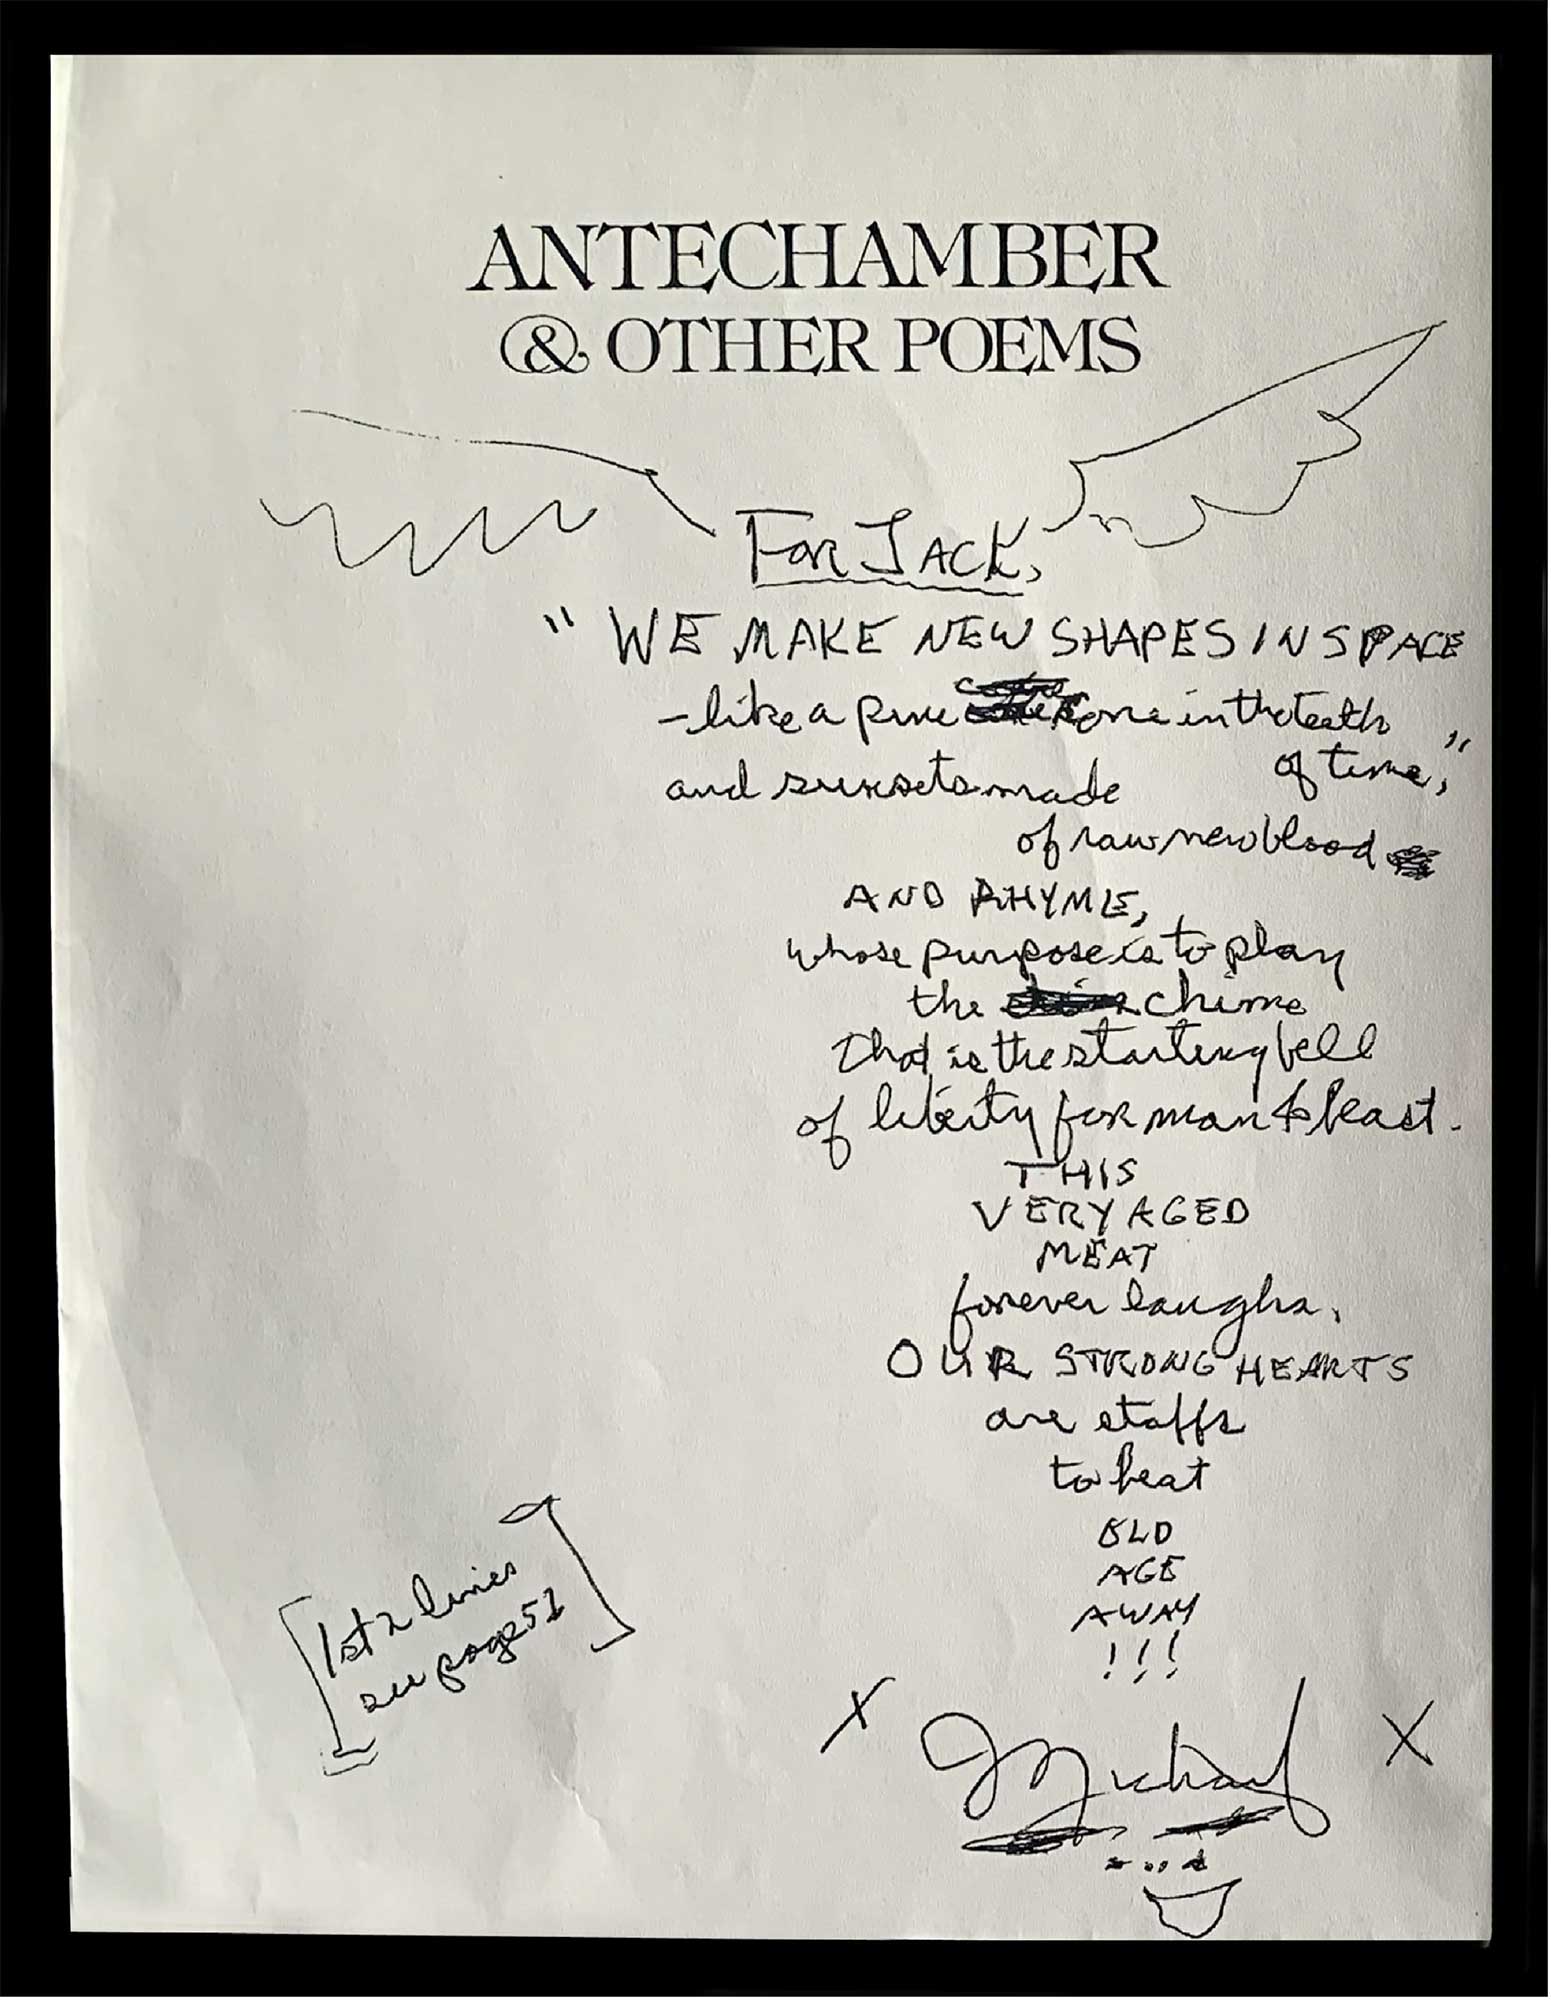 Antechamber & Other Poems by Michael McClure